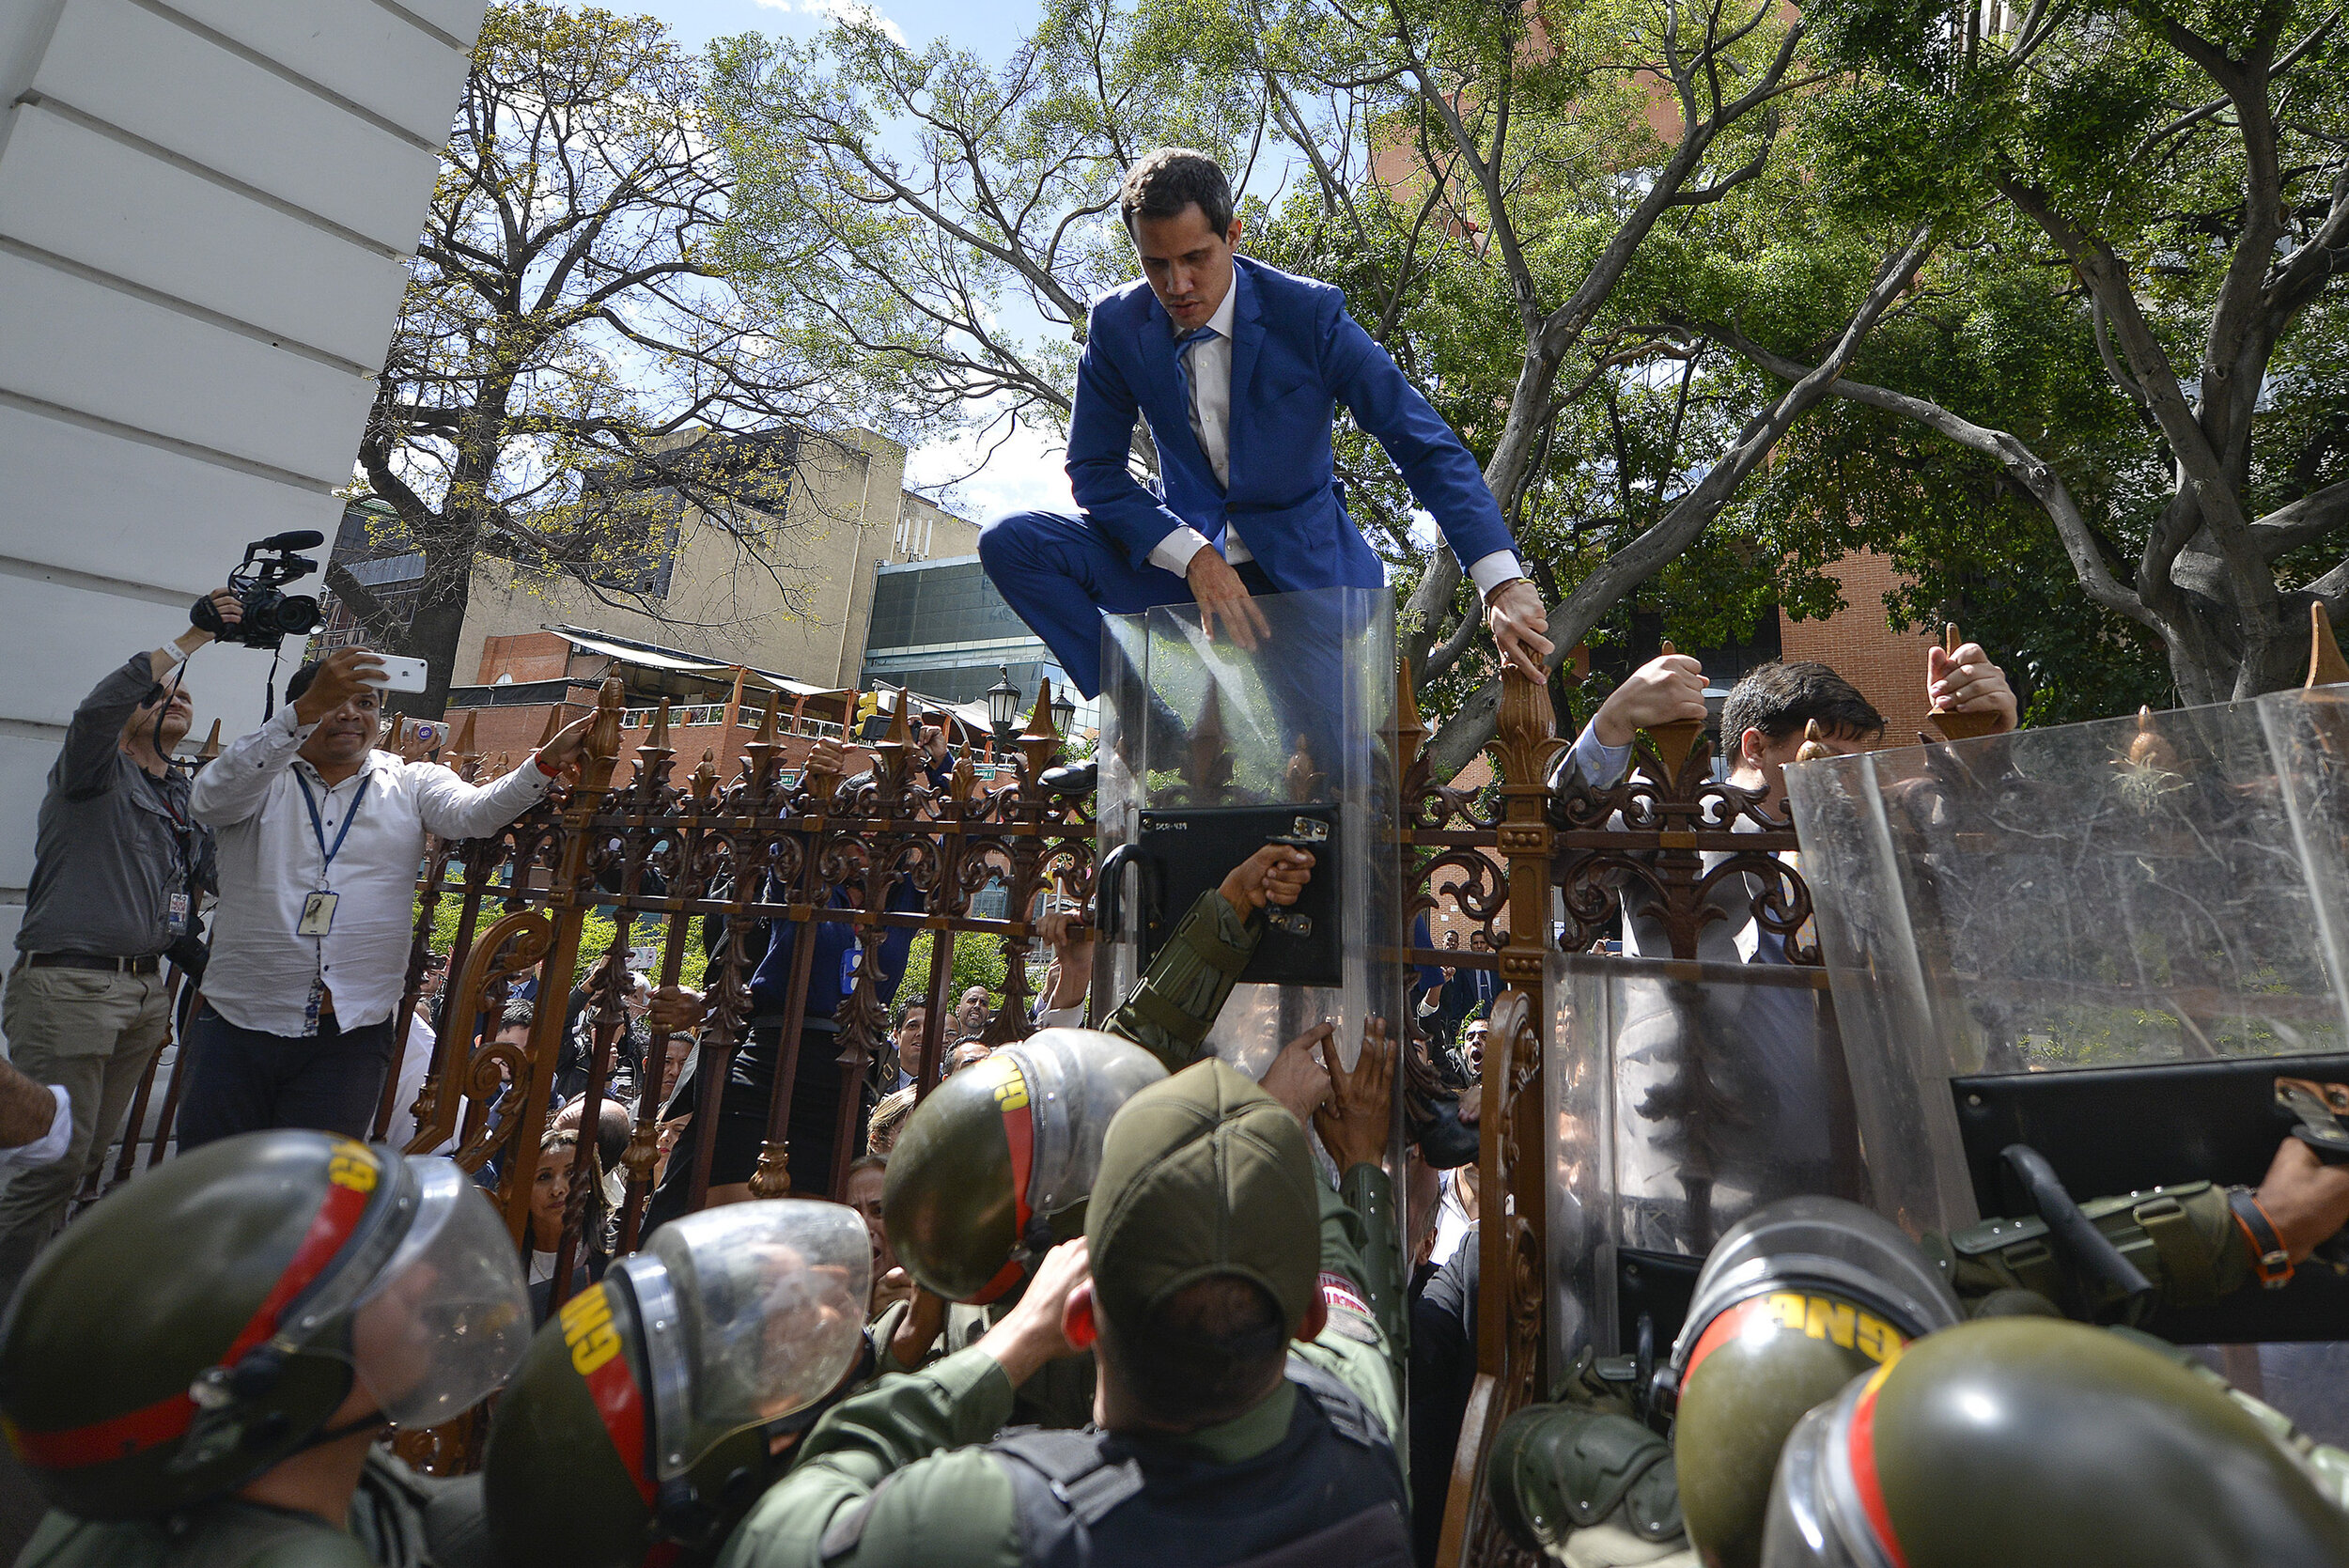  National Assembly President Juan Guaido, Venezuela's opposition leader, climbs the fence in a failed attempt to enter the Assembly compound as he and other opposition lawmakers are blocked from entering a session to elect the body's new leadership i